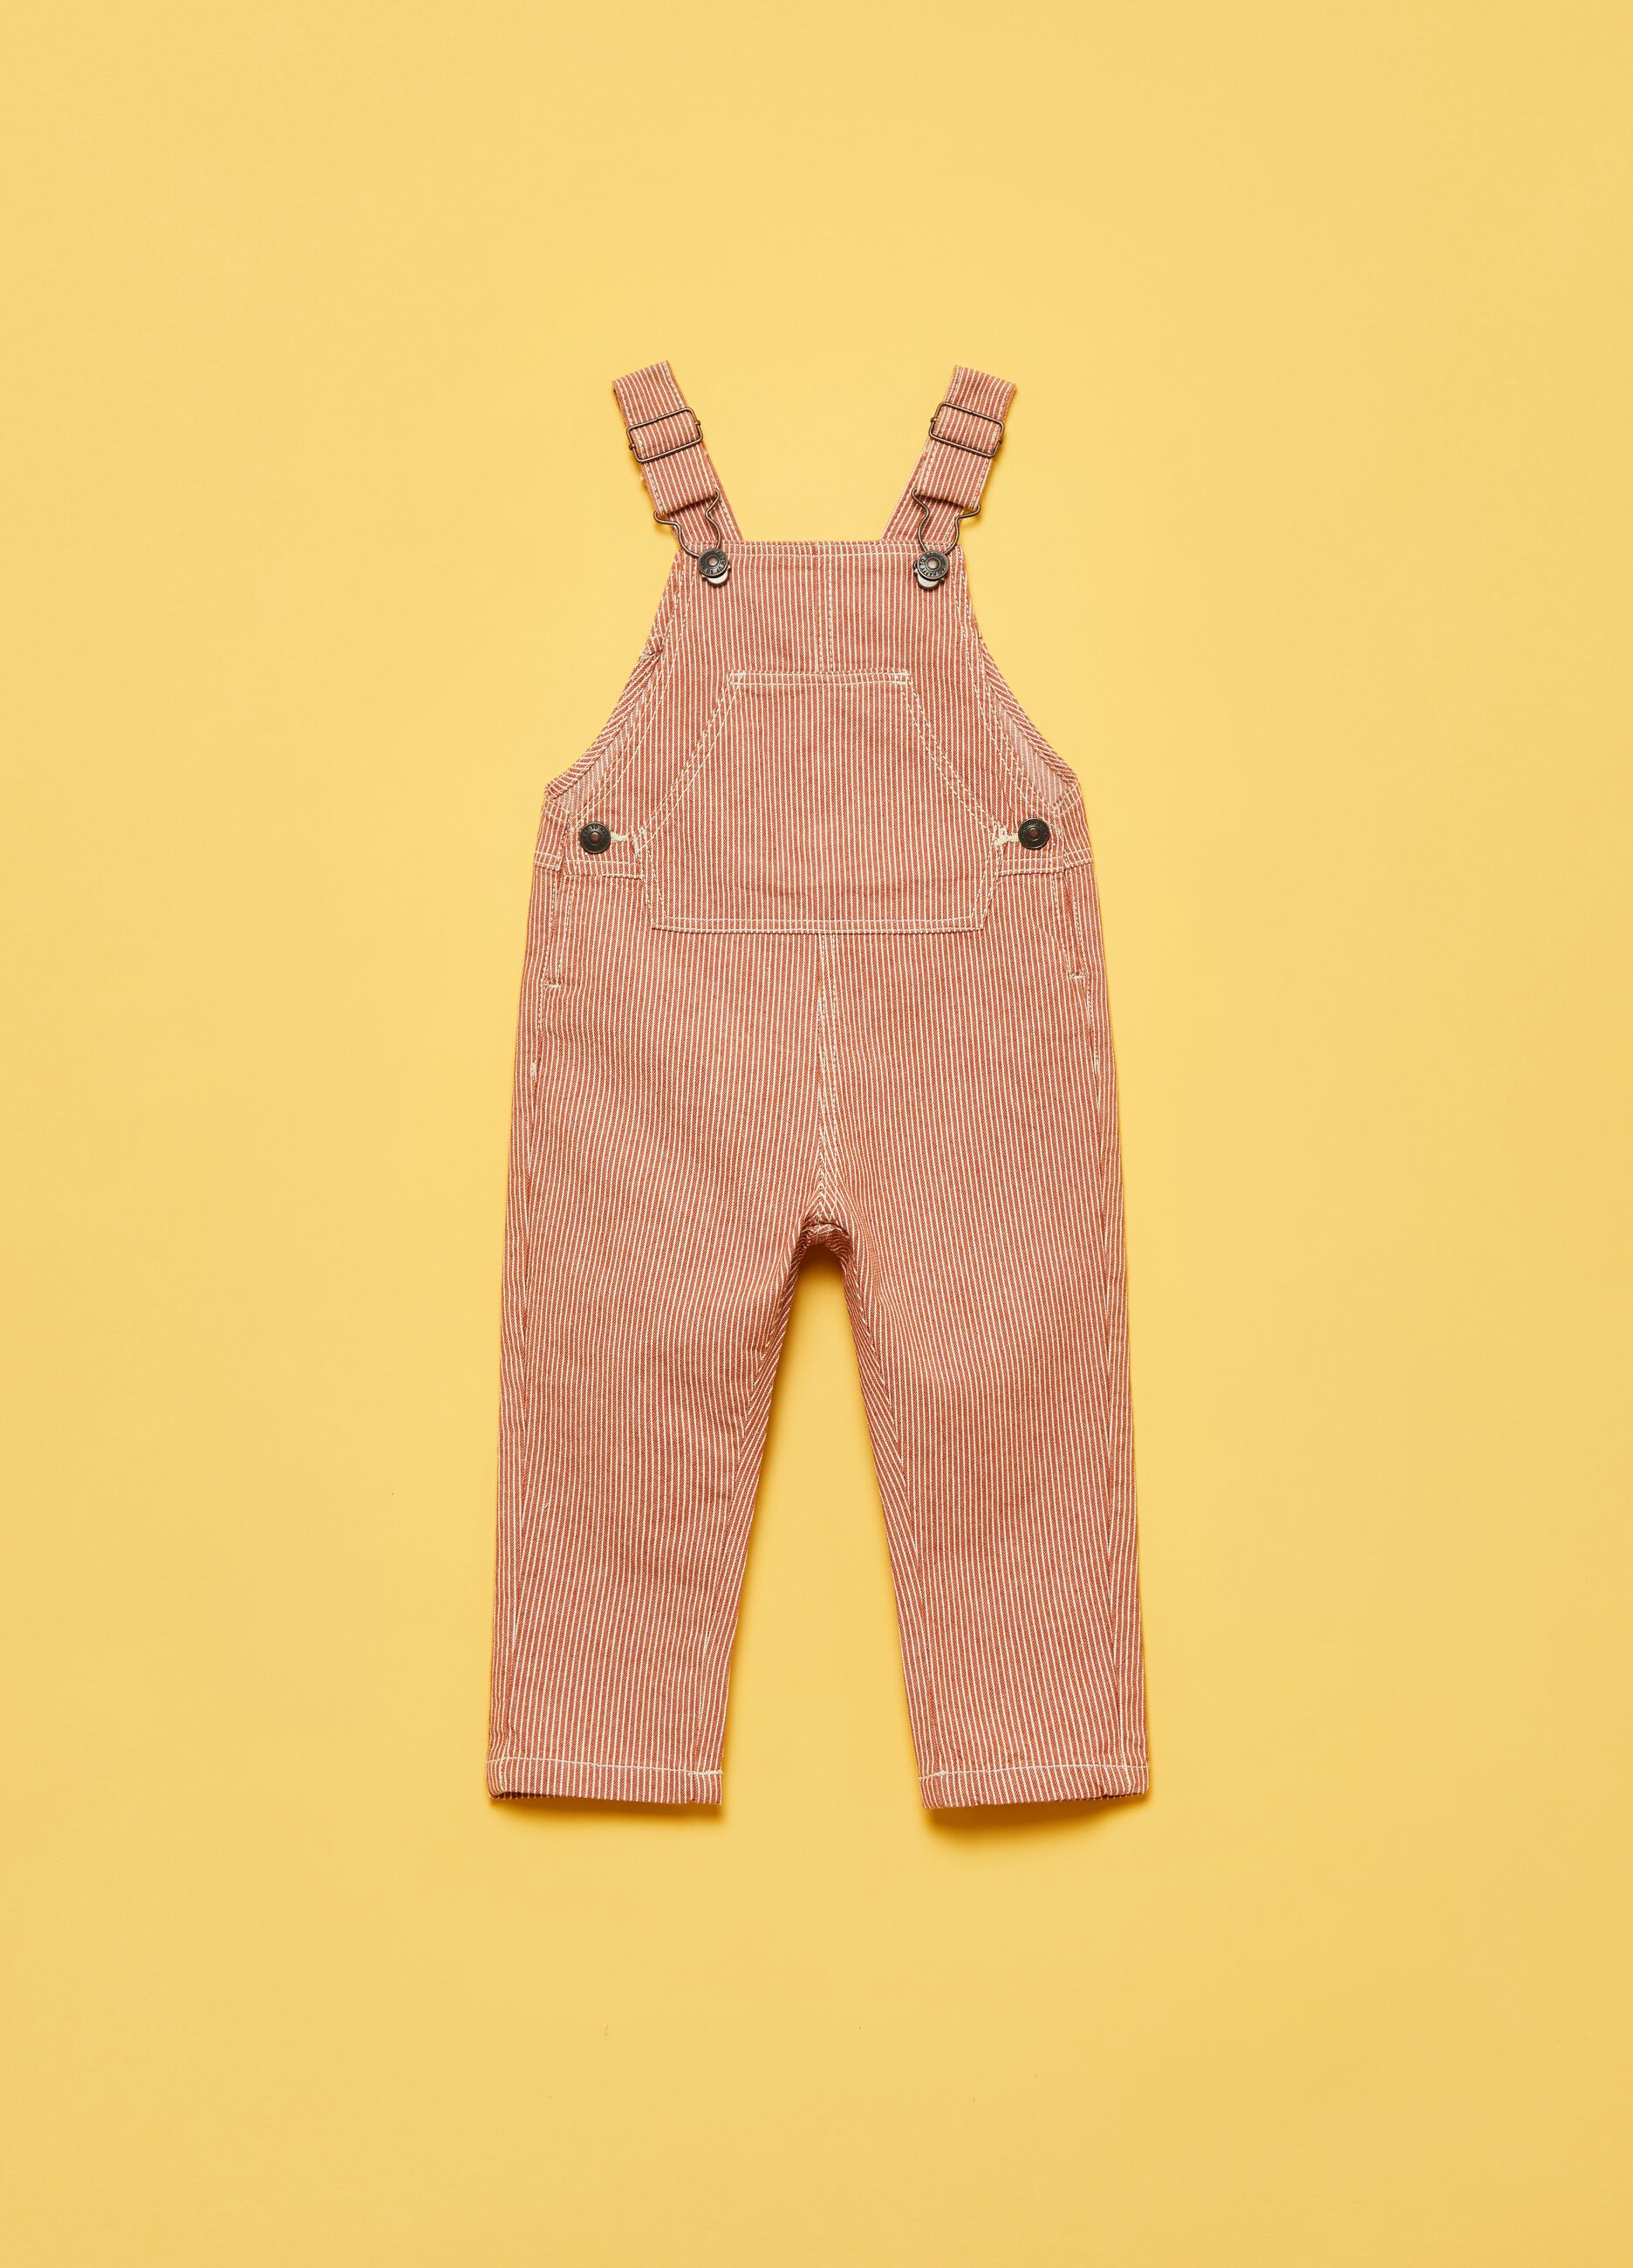 100% cotton striped dungarees